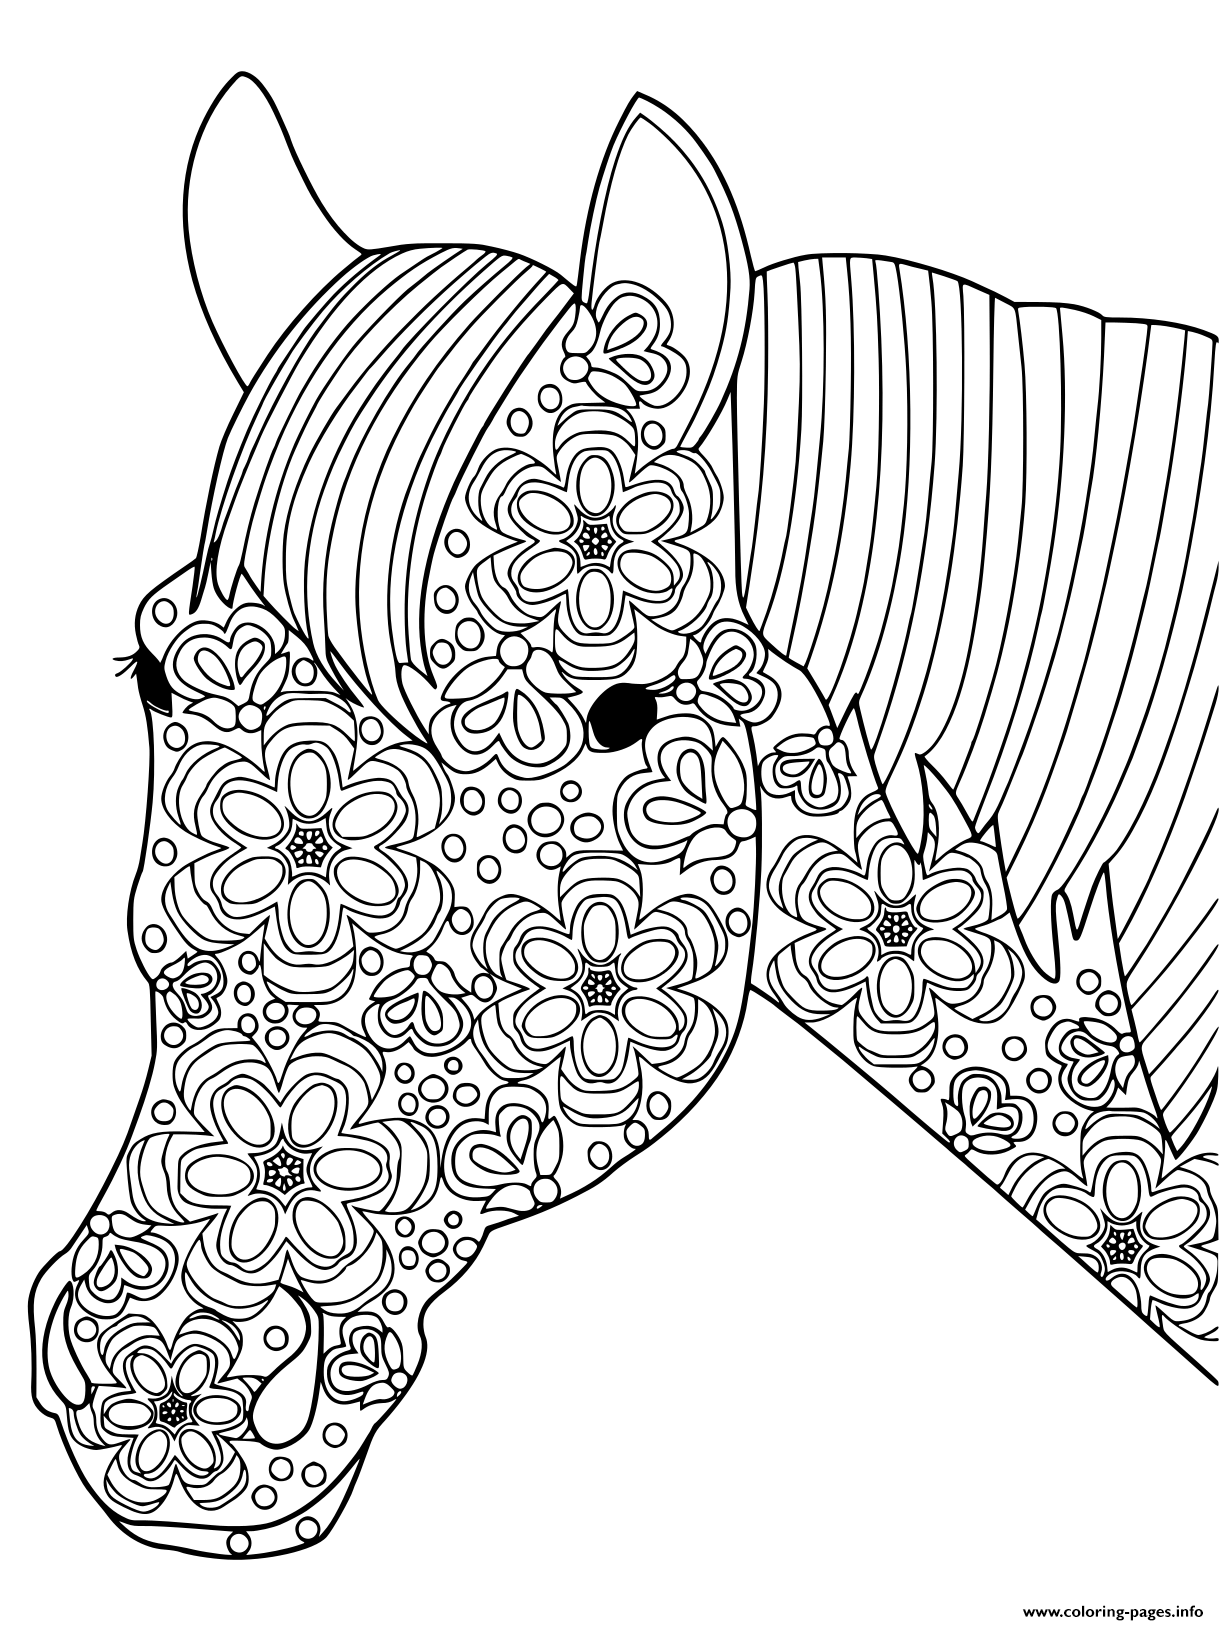 Head Horse For Adults Anti Stress coloring